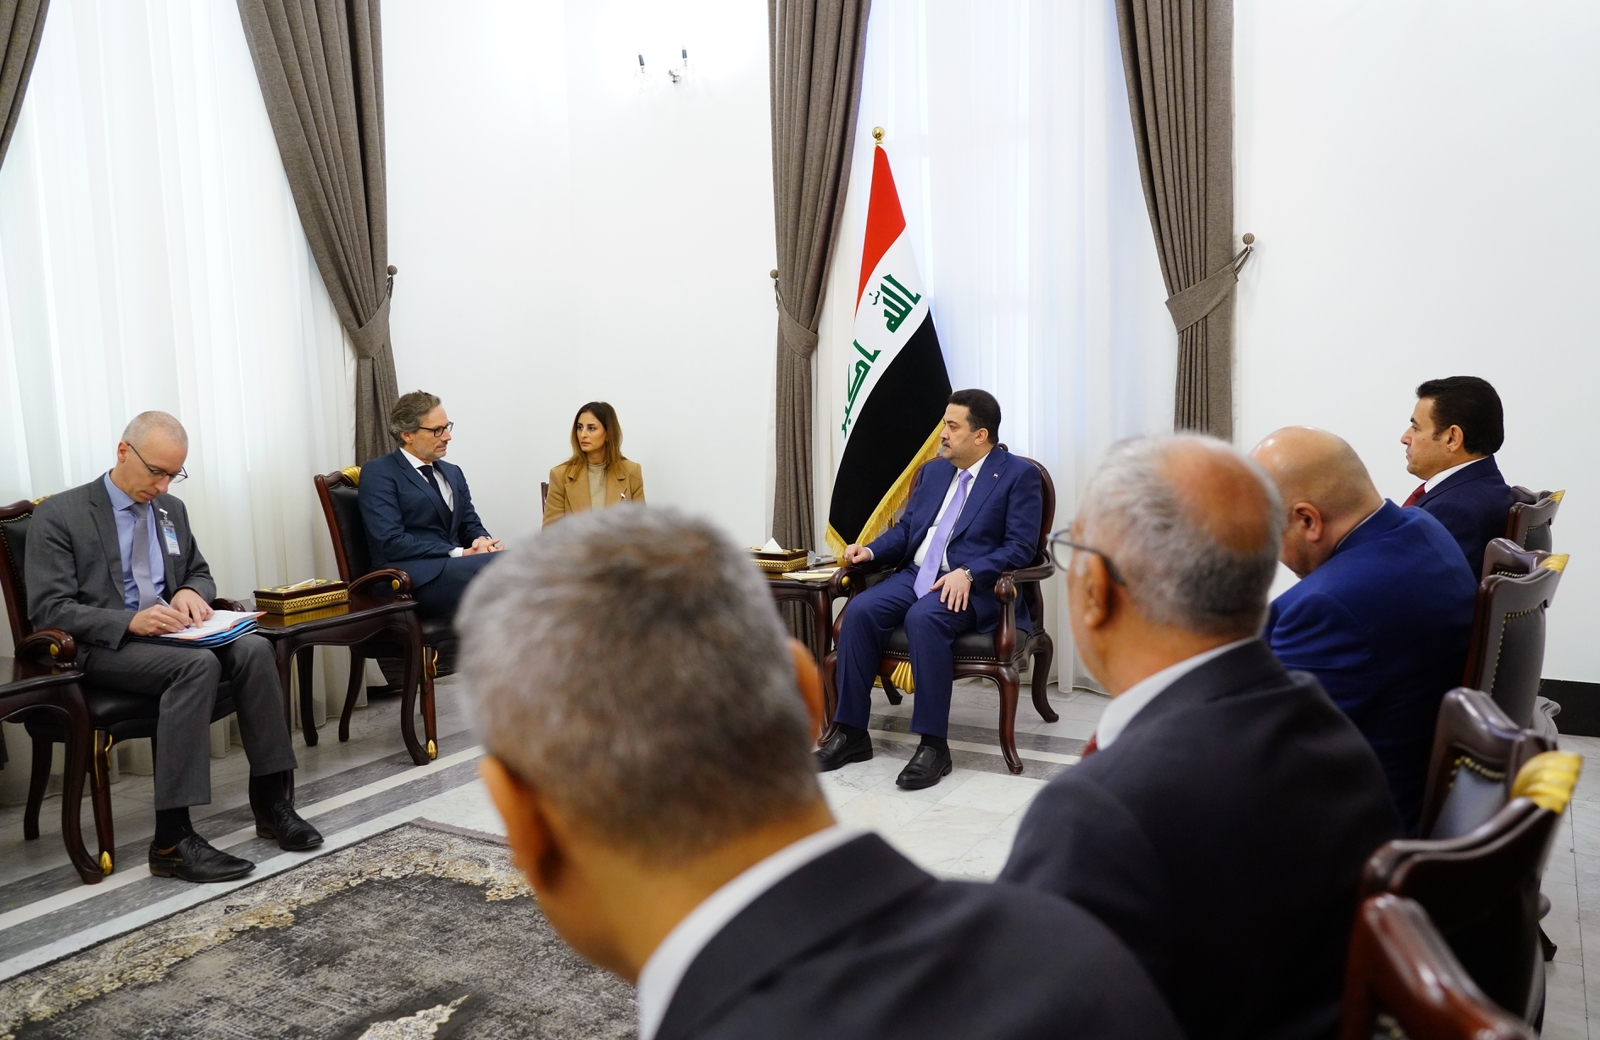 PM Al-Sudani praises Berlin's cooperation with Iraq in the war against ISIS